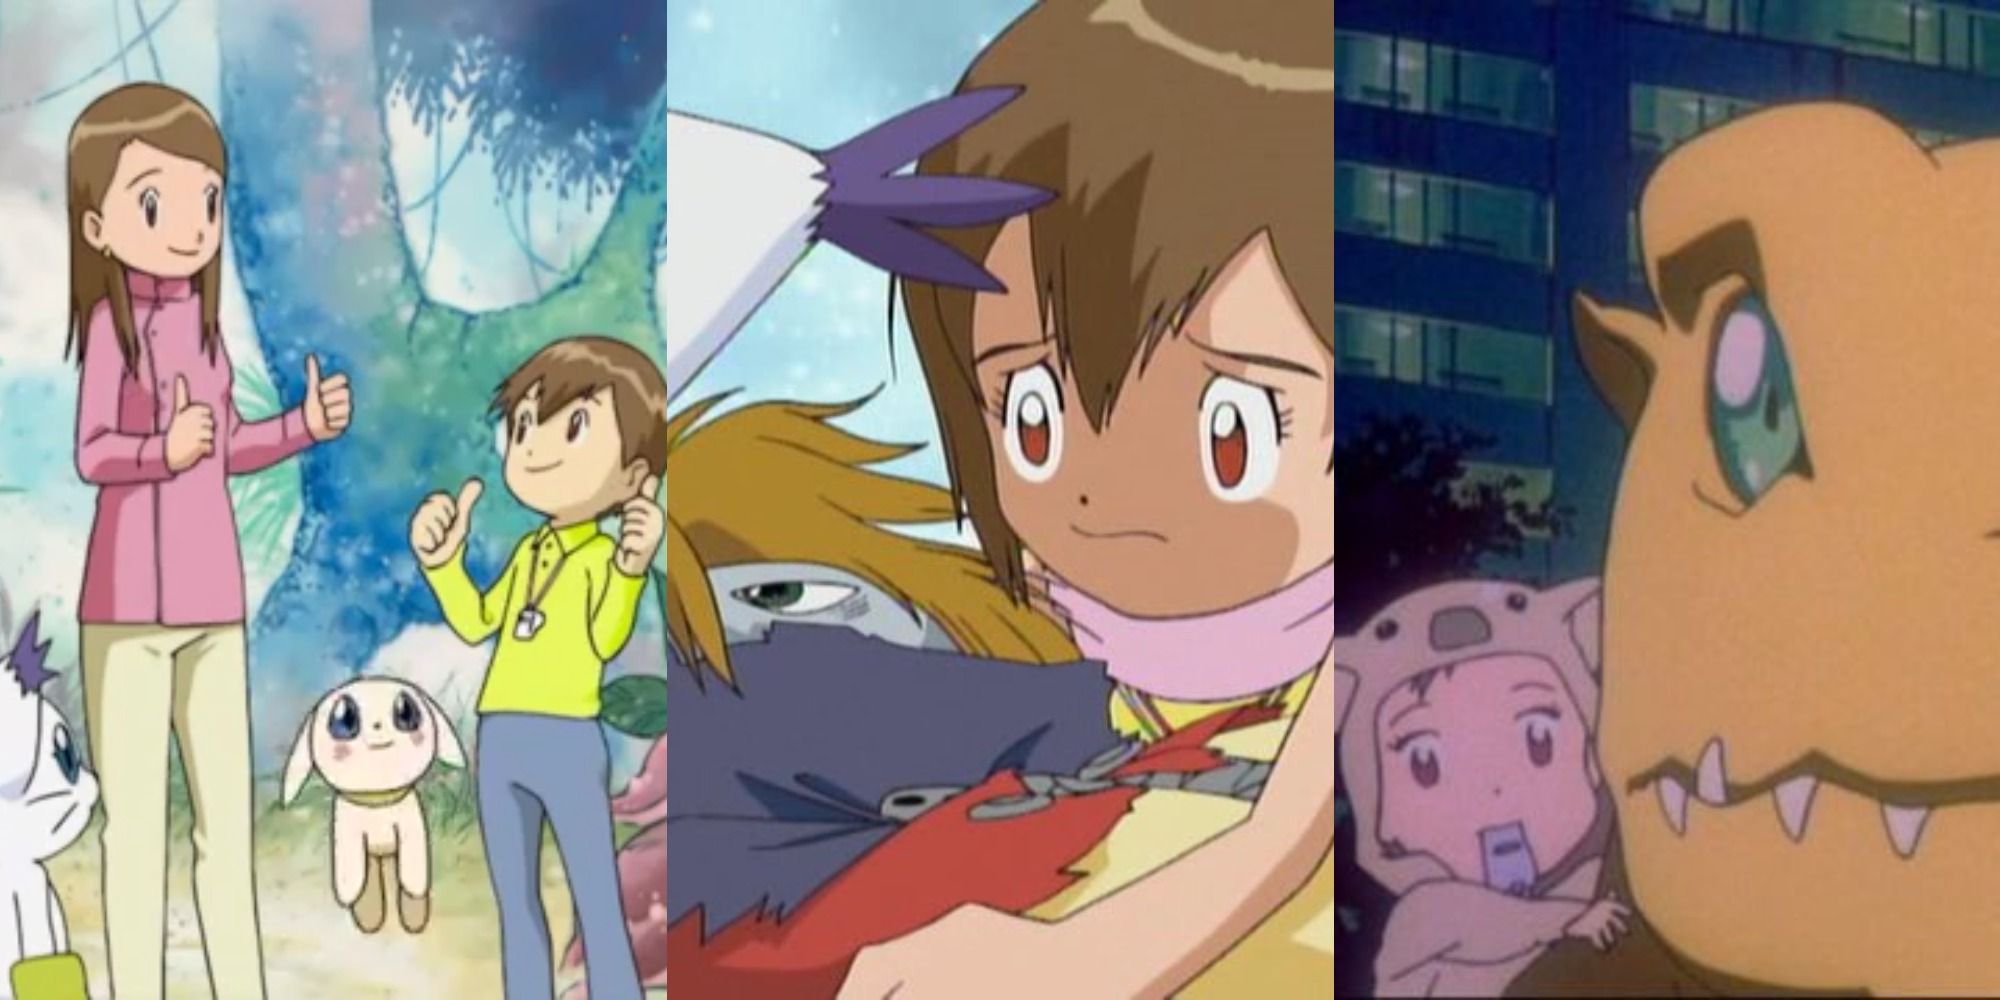 Kari in the finale of Digimon Adventure 02, woth Wizardmon, Digimon the Movie